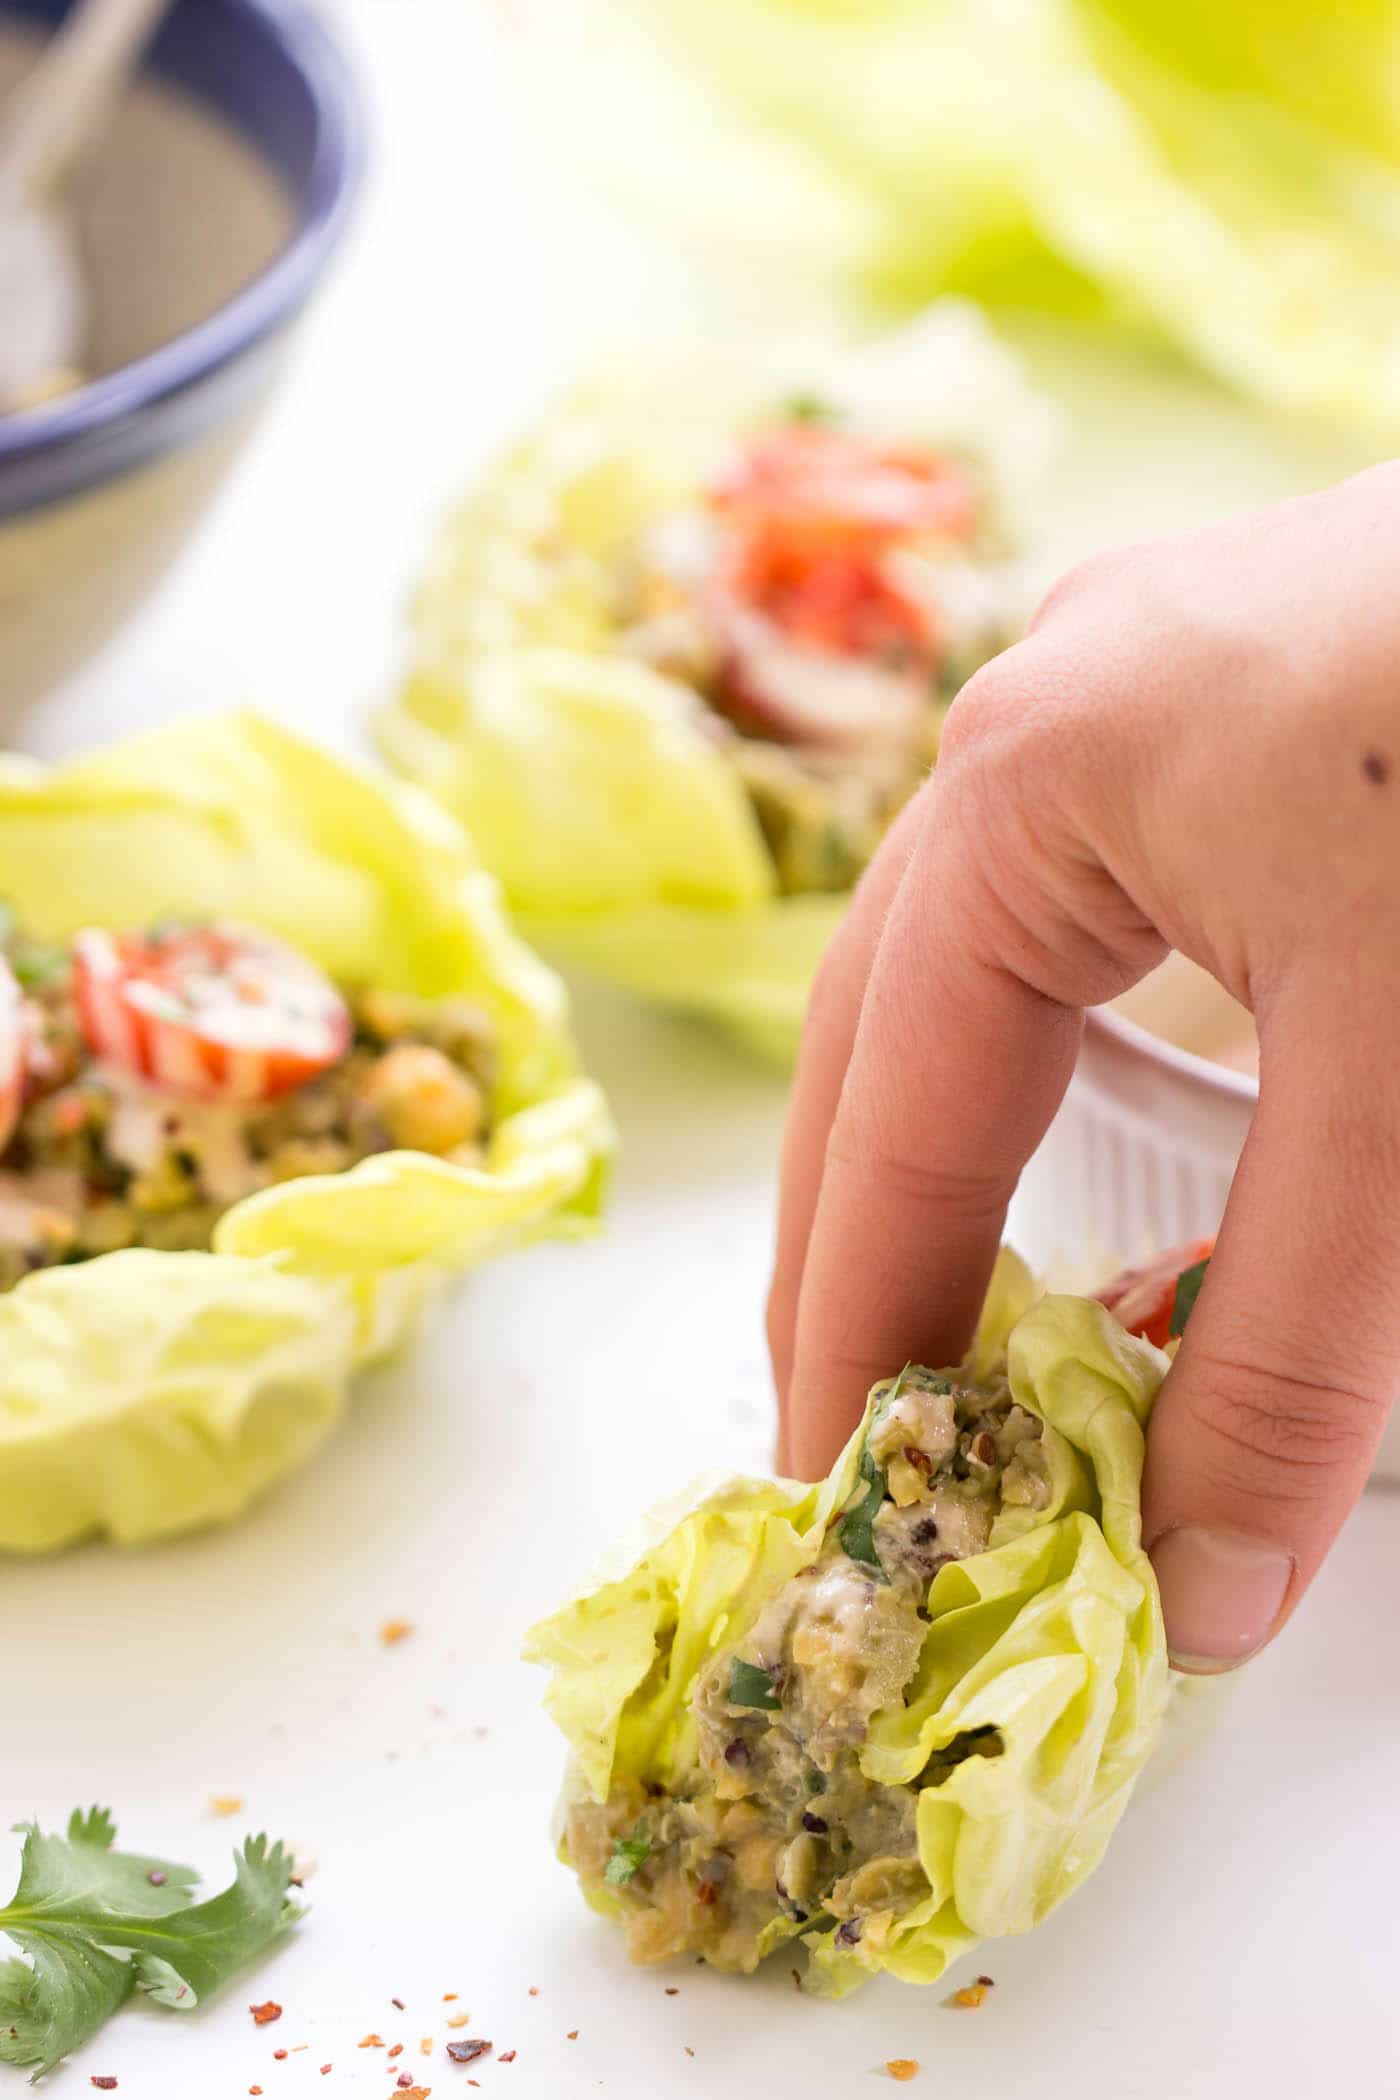 Grab one of these quinoa lettuce wraps for lunch today! Filled with a HEALTHY + VEGAN smashed chickpea salad, you get tons of protein, fiber and healthy fats.